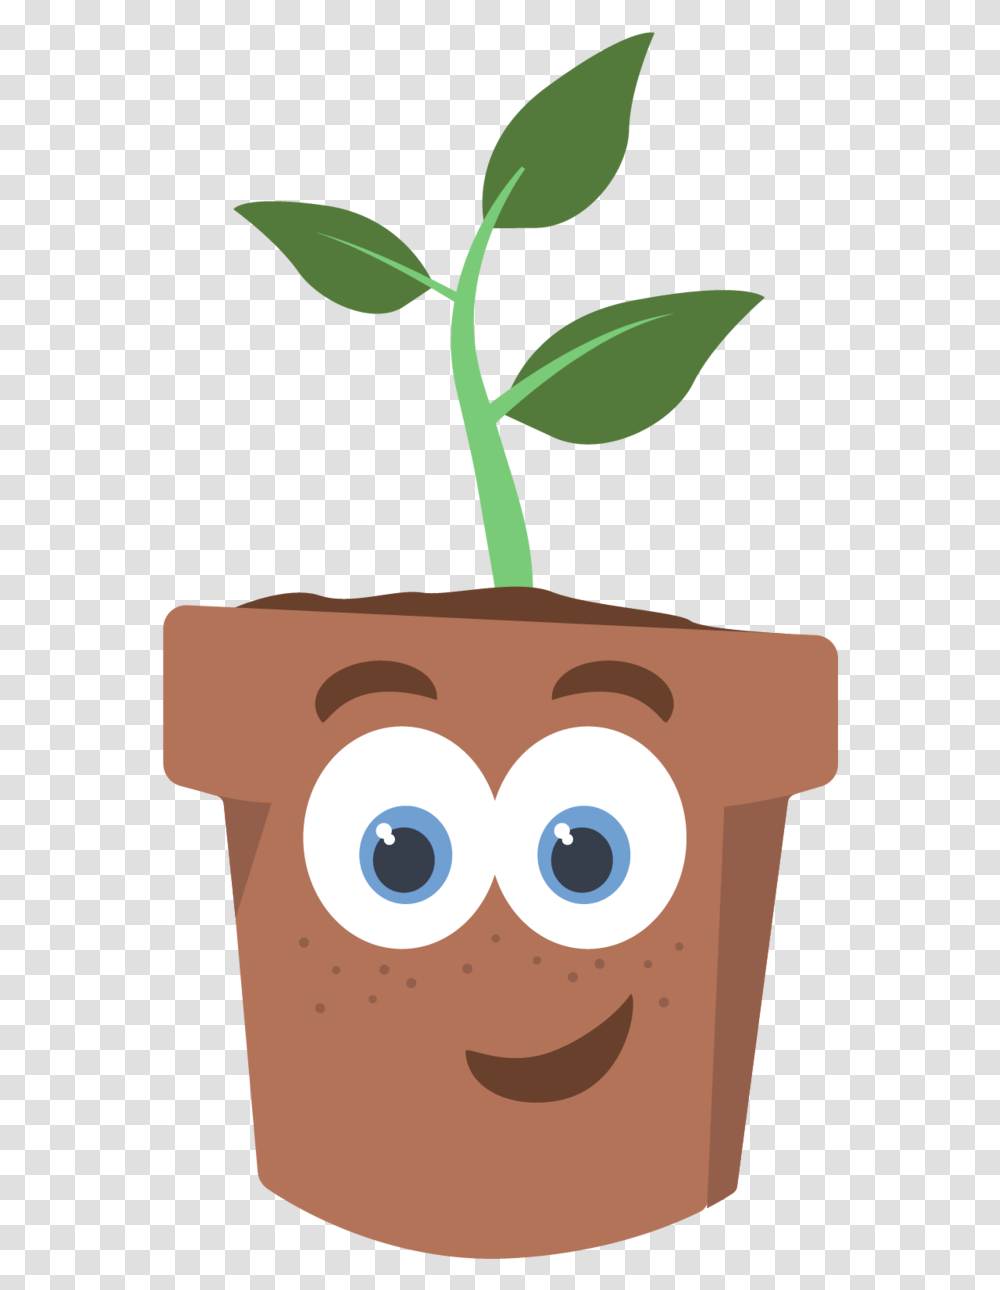 Sprouts Saplings Plant Sprout Cartoonized, Soil, Tree, Flower, Blossom Transparent Png